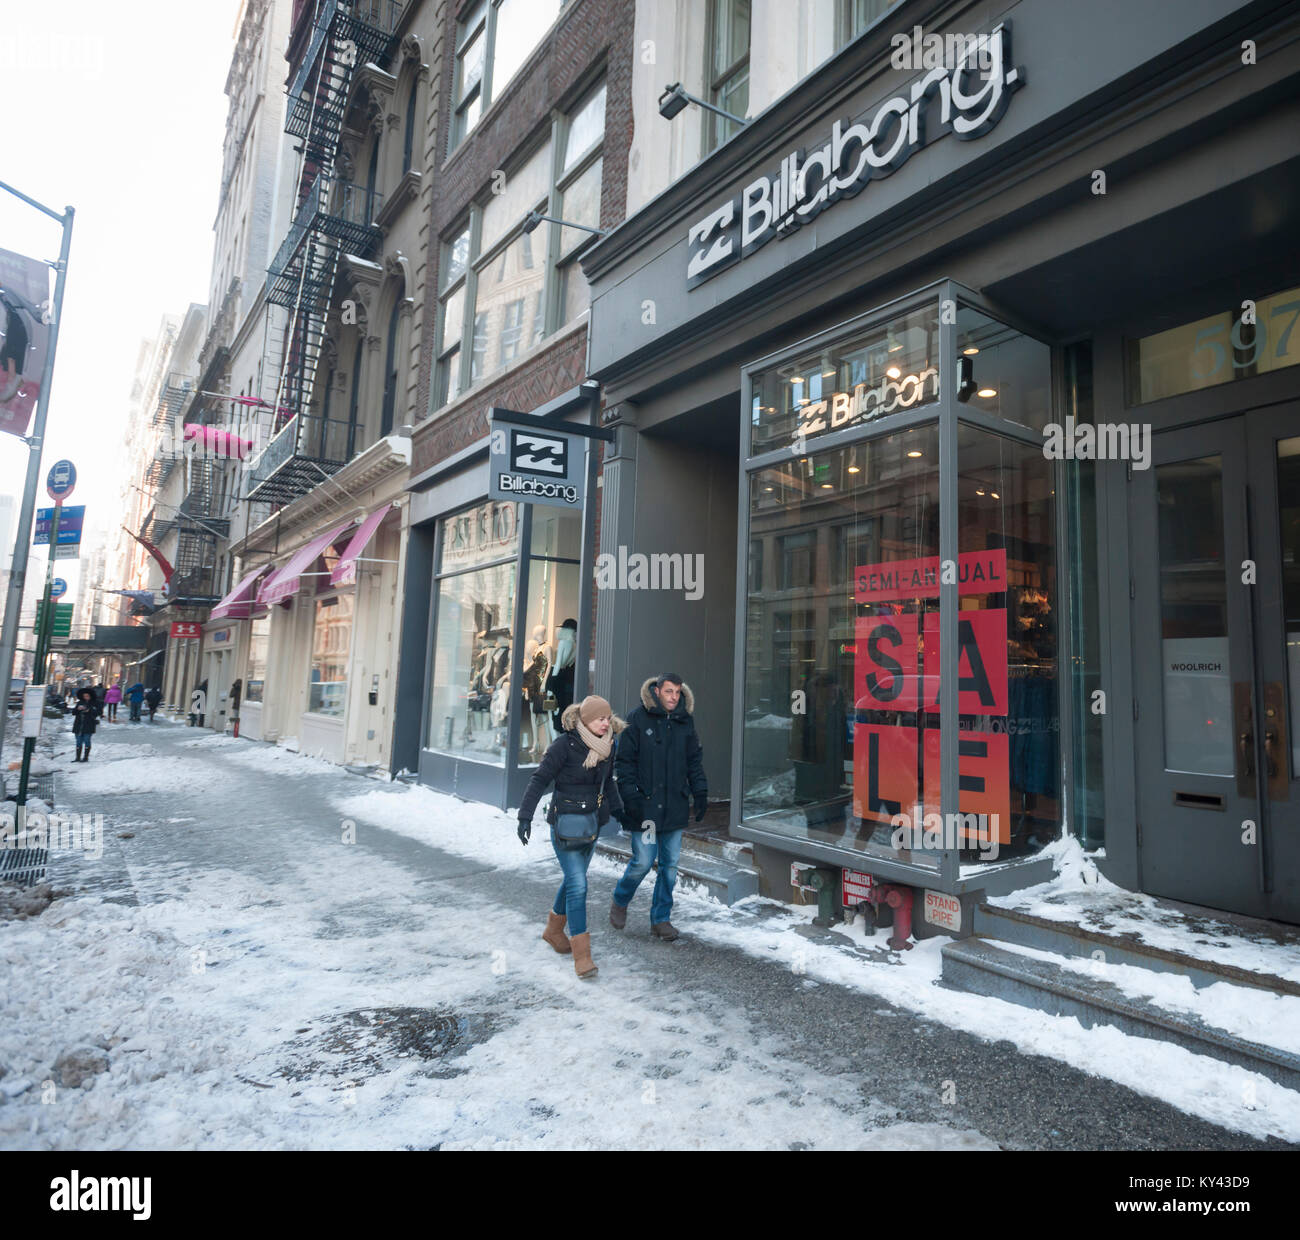 The Billabong store in Soho in New York on Friday, January 5, 2018. Oaktree  Capital Management, the owner of surfer brand Quicksilver, is buying  Australian-based Billabong in a deal worth $155 million.